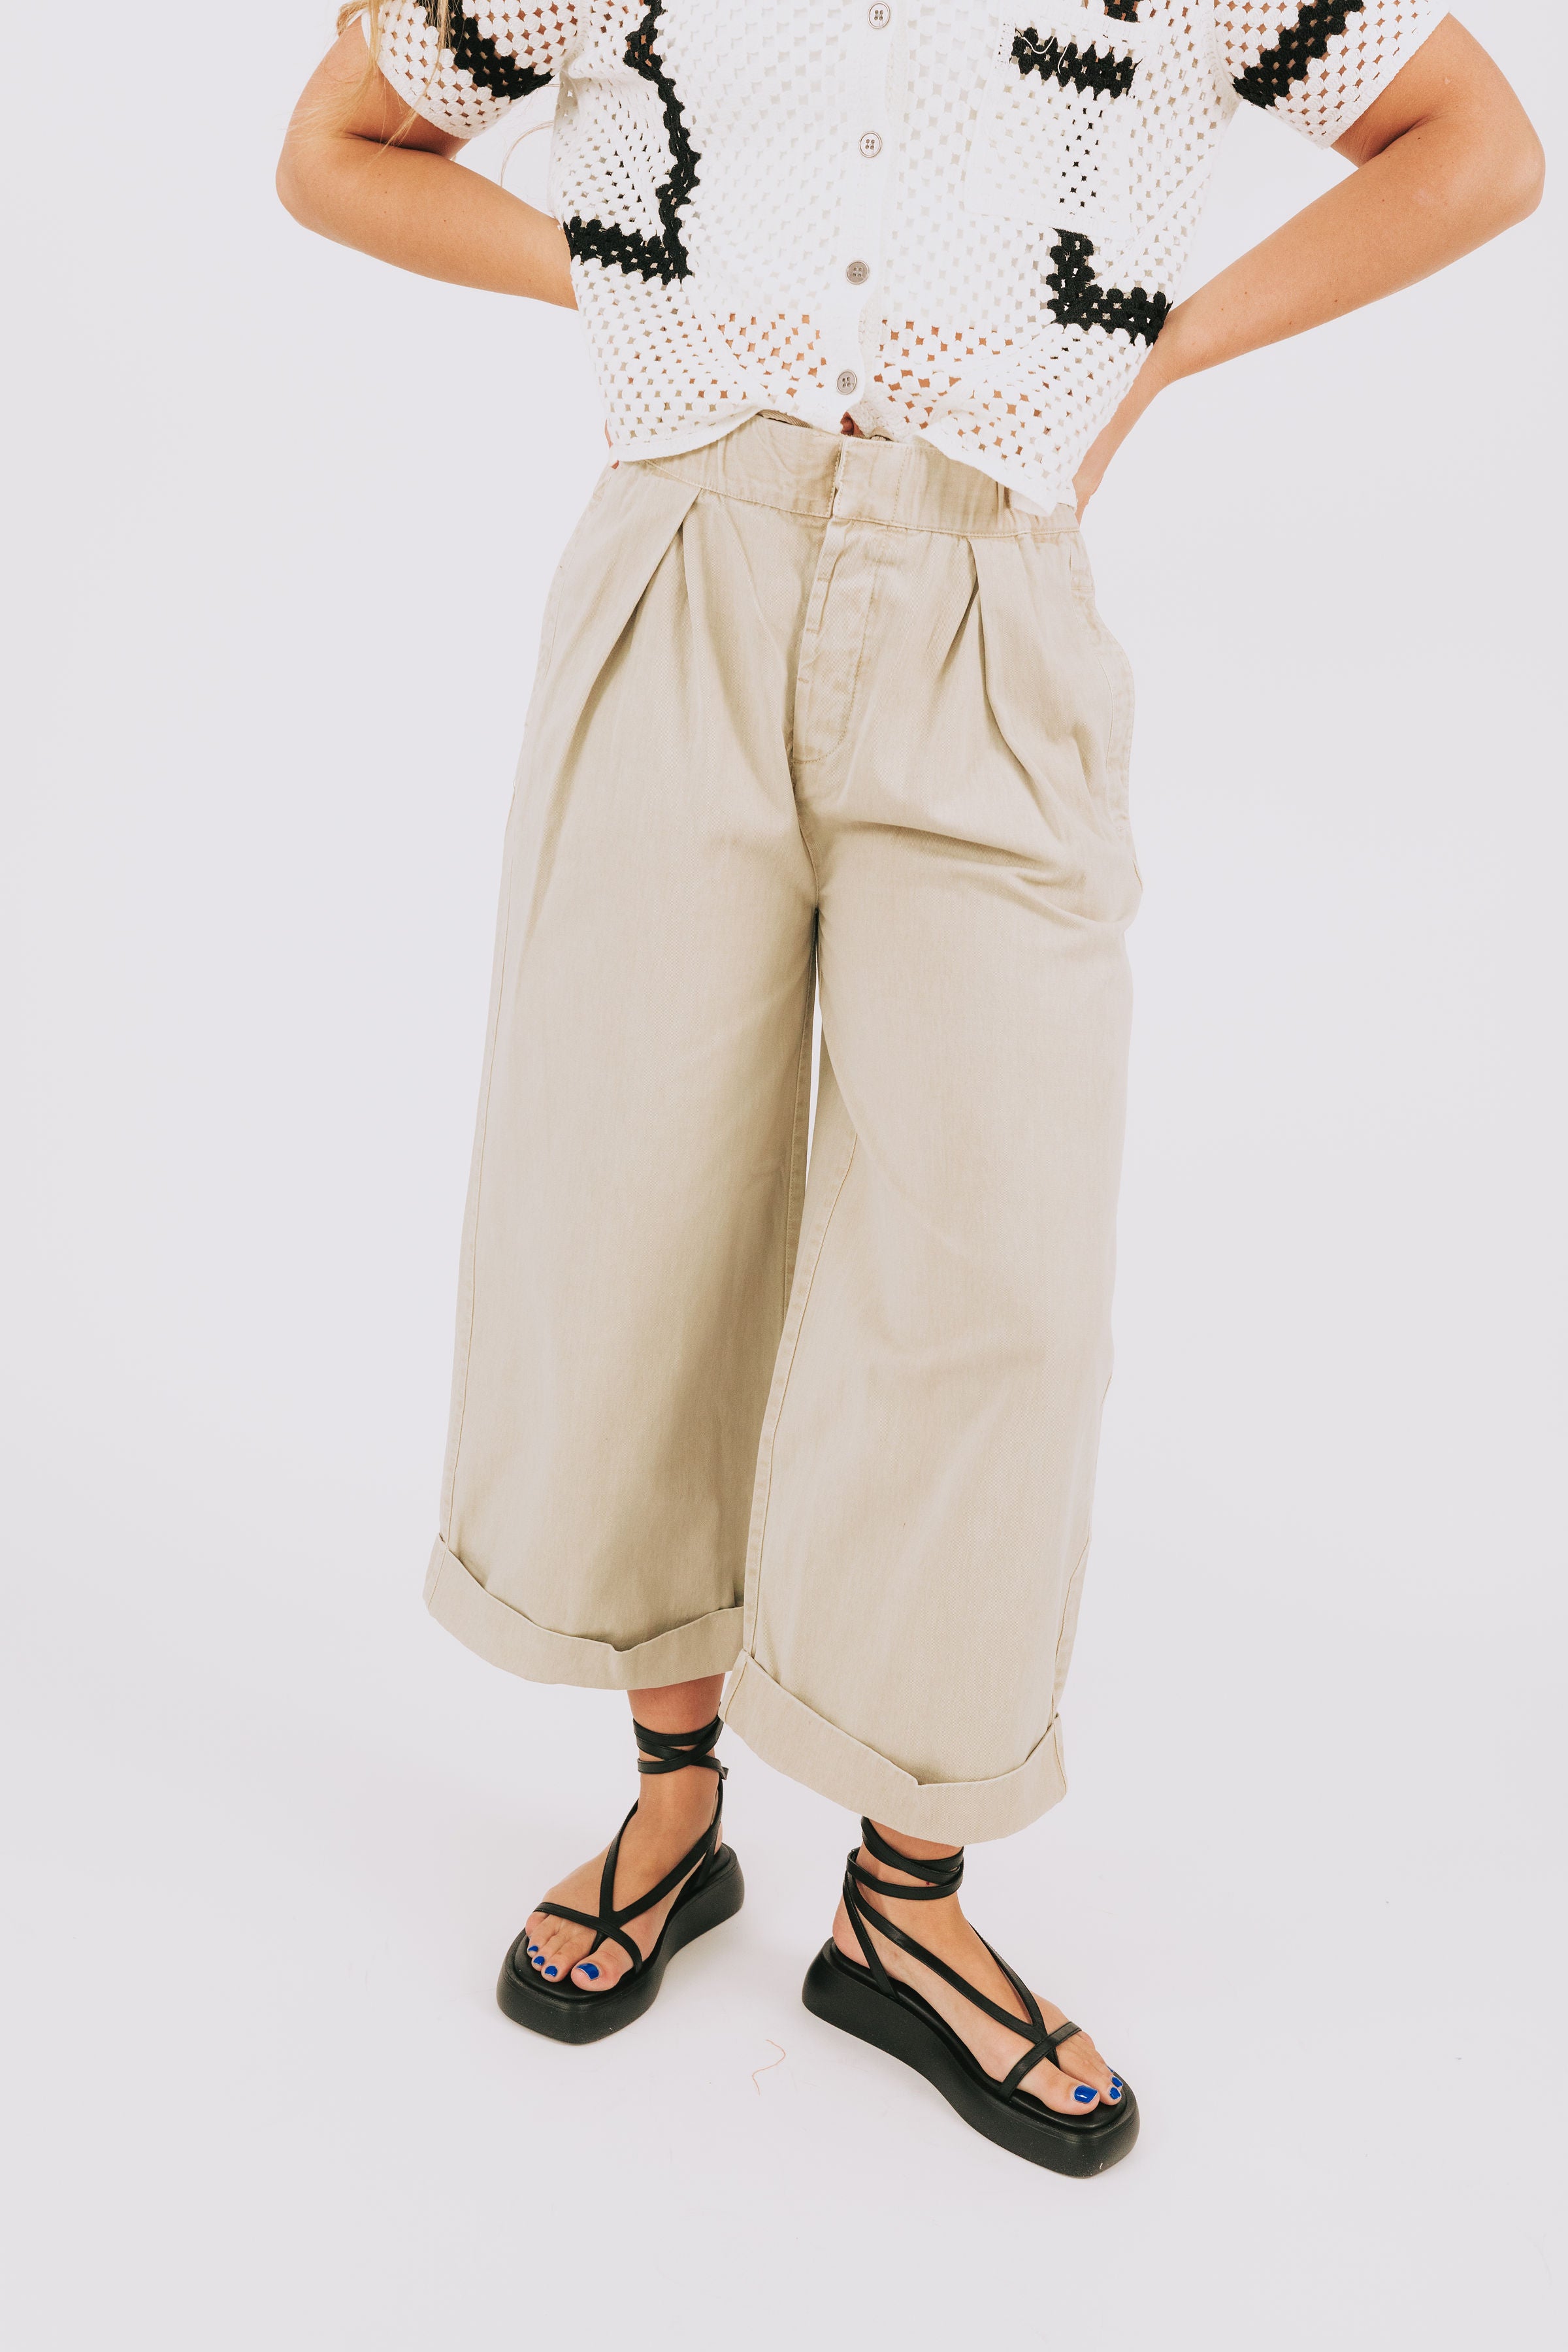 FREE PEOPLE - After Love Cuff Pant